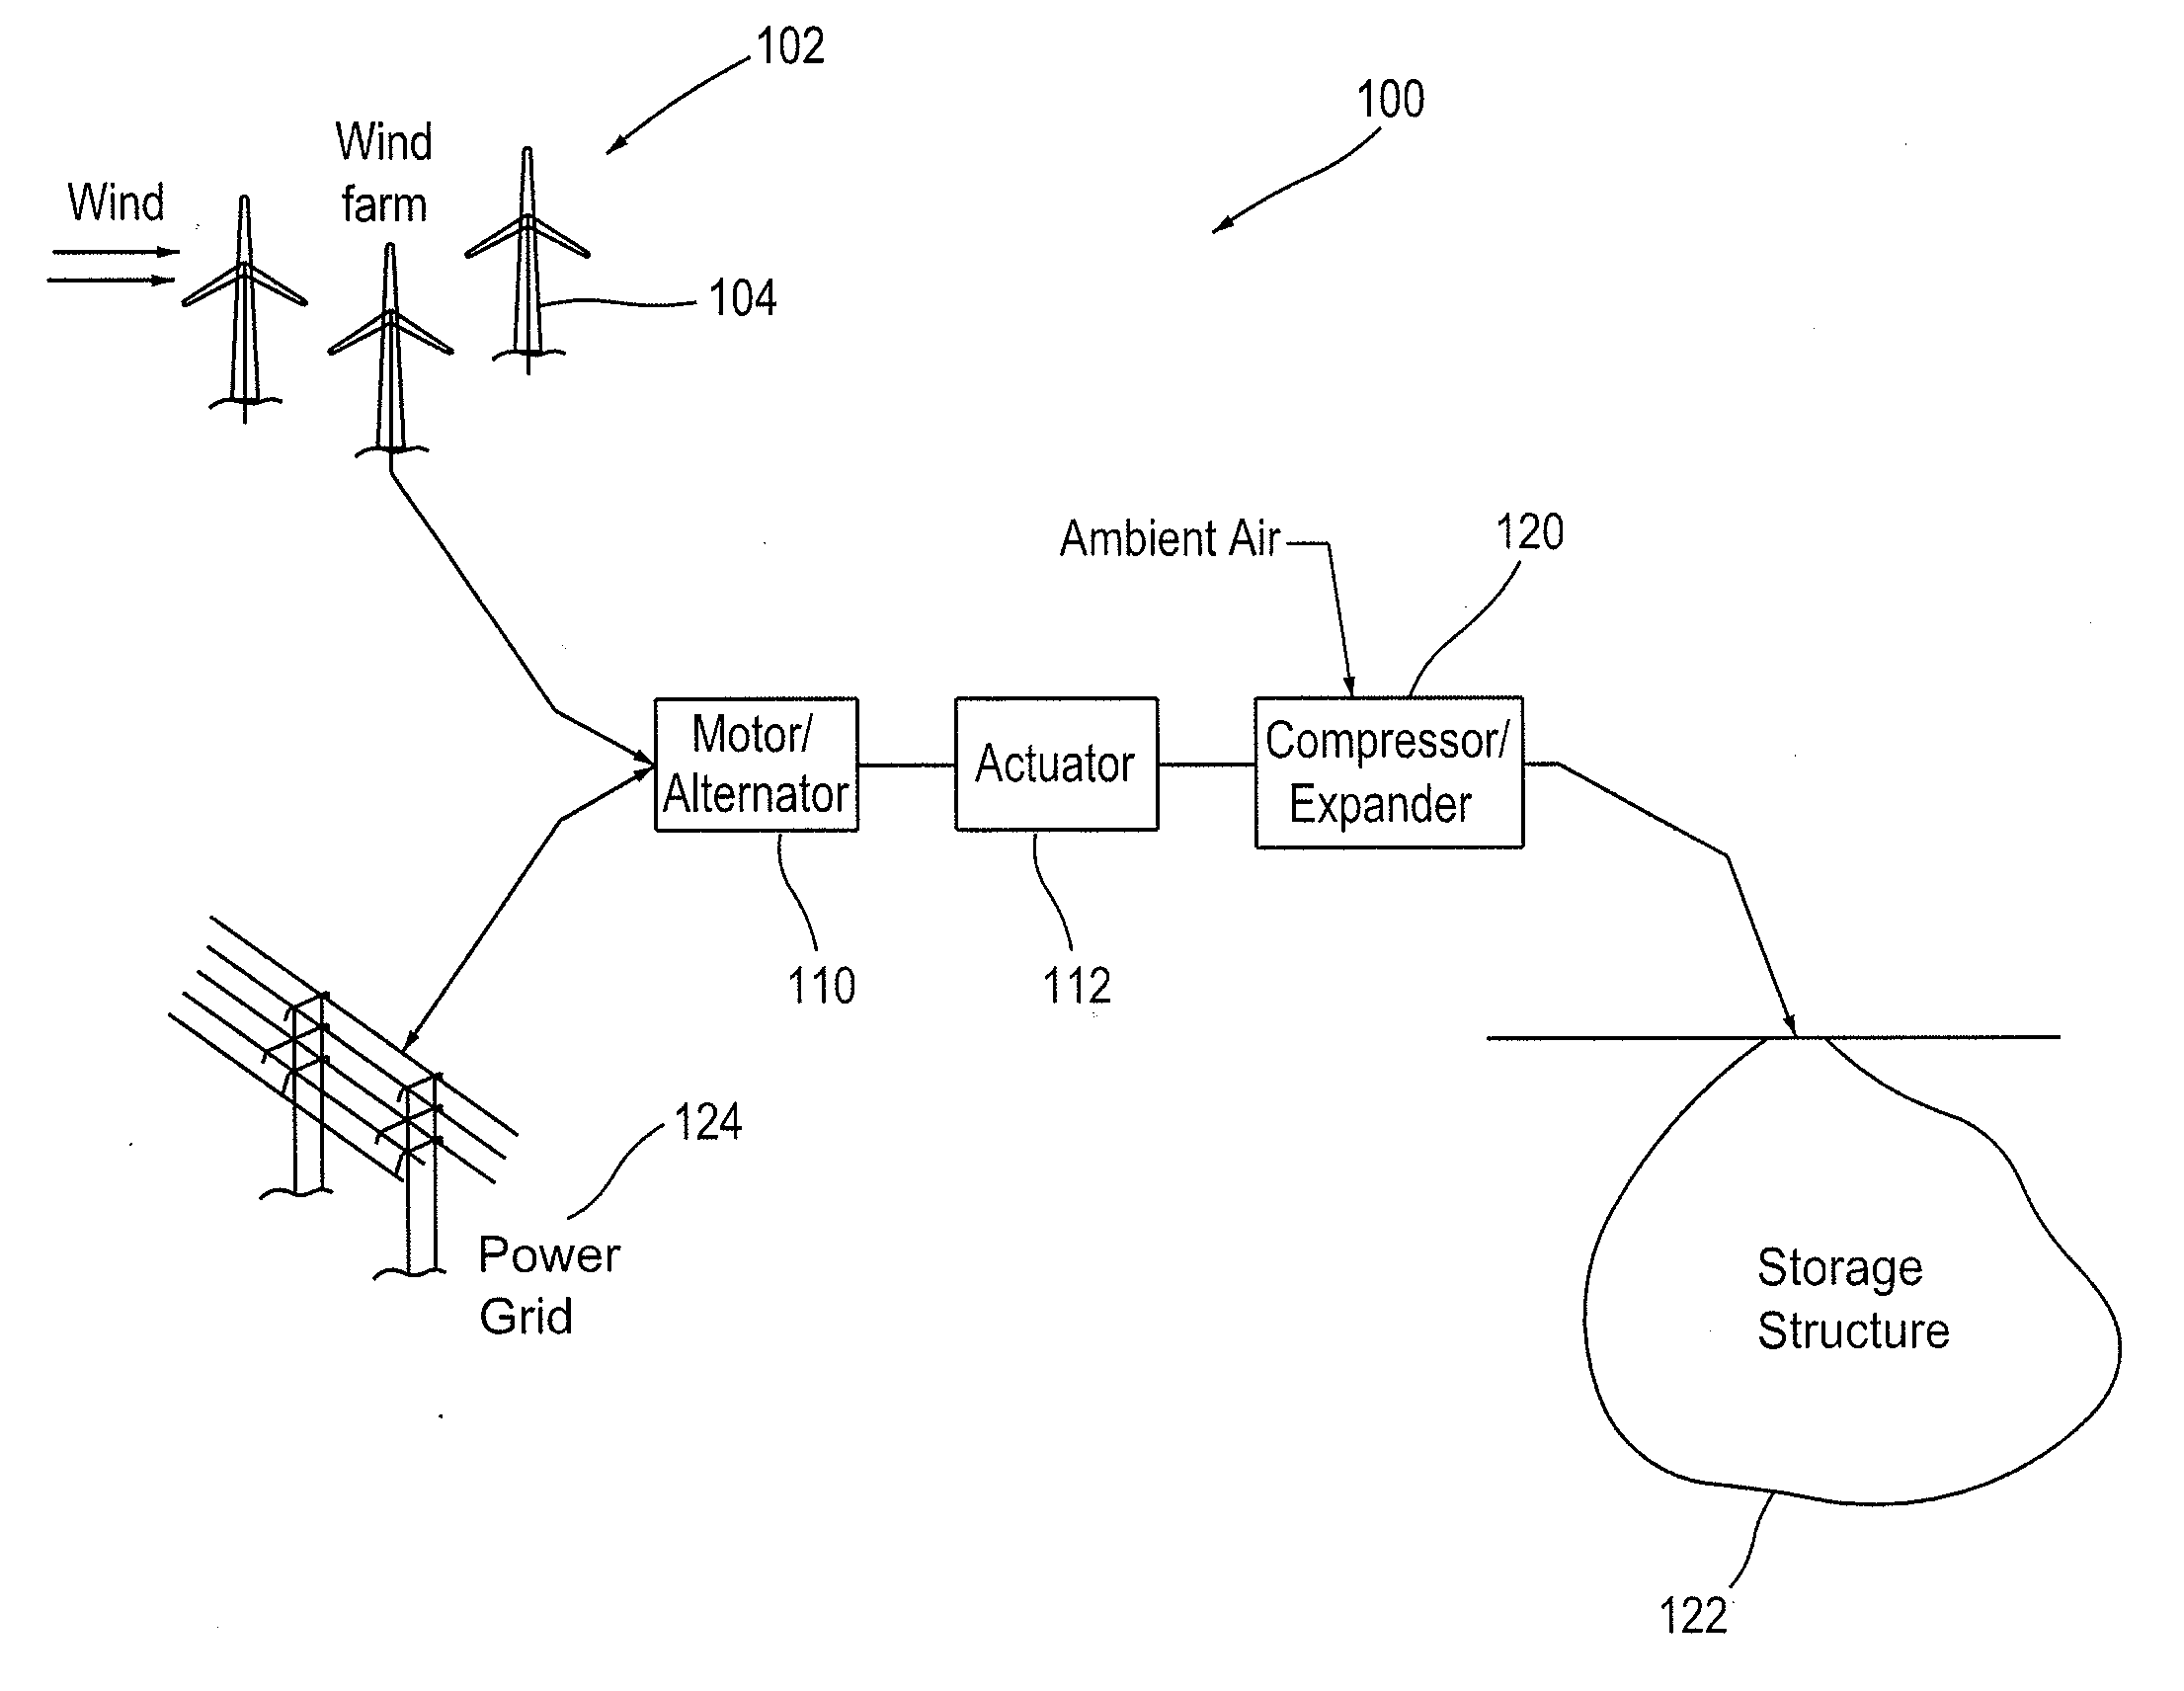 Compressor and/or Expander Device